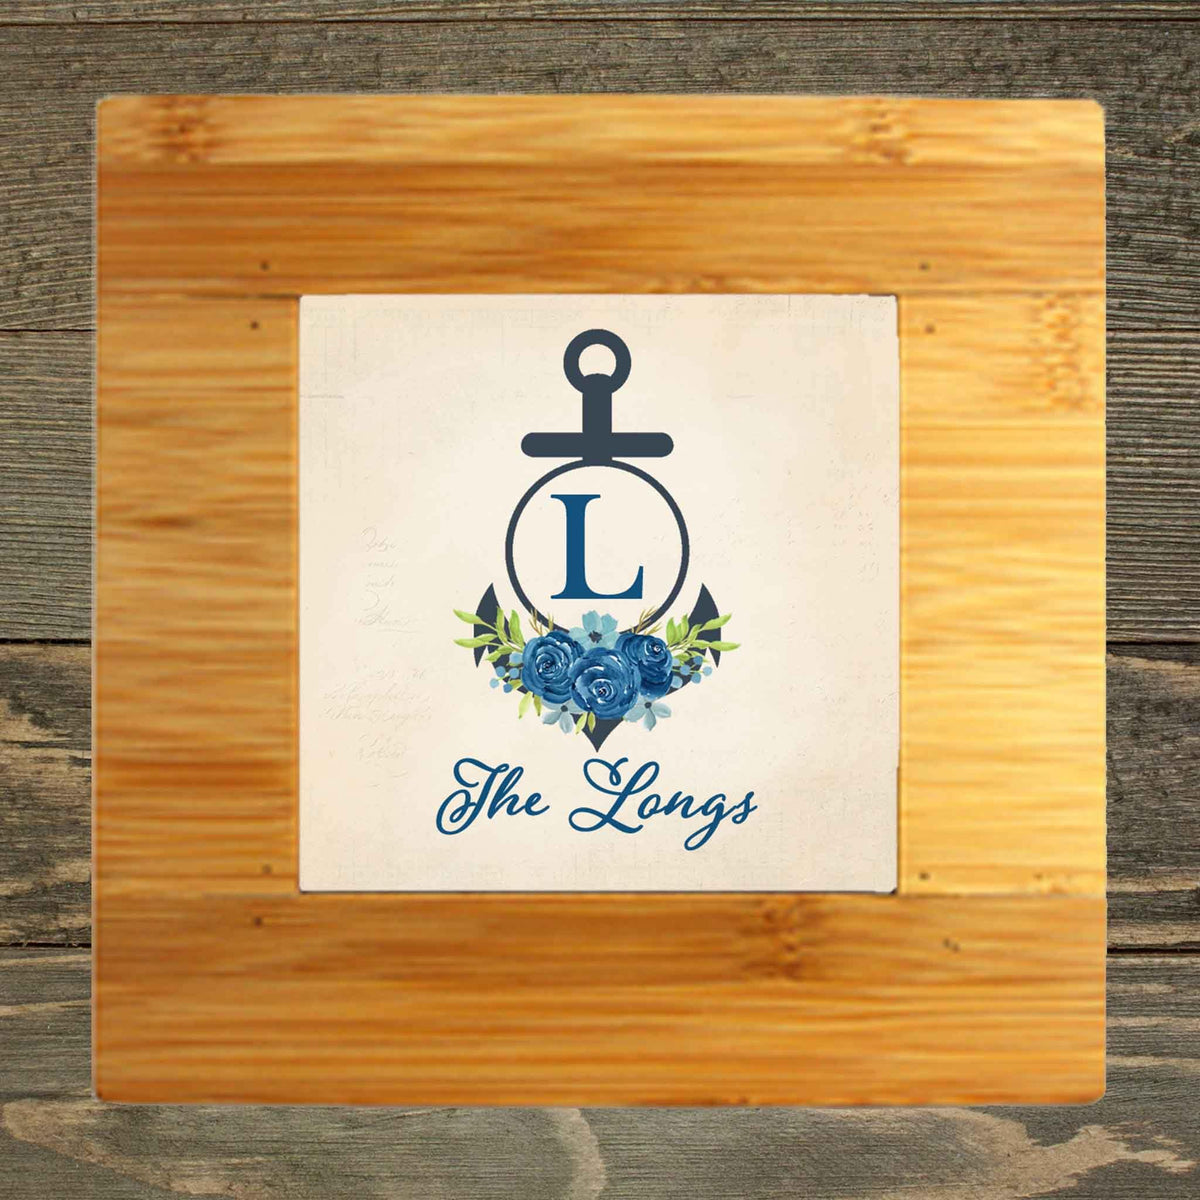 Personalized Iron Trivet | Custom Kitchen Gifts | Anchor with Navy Roses